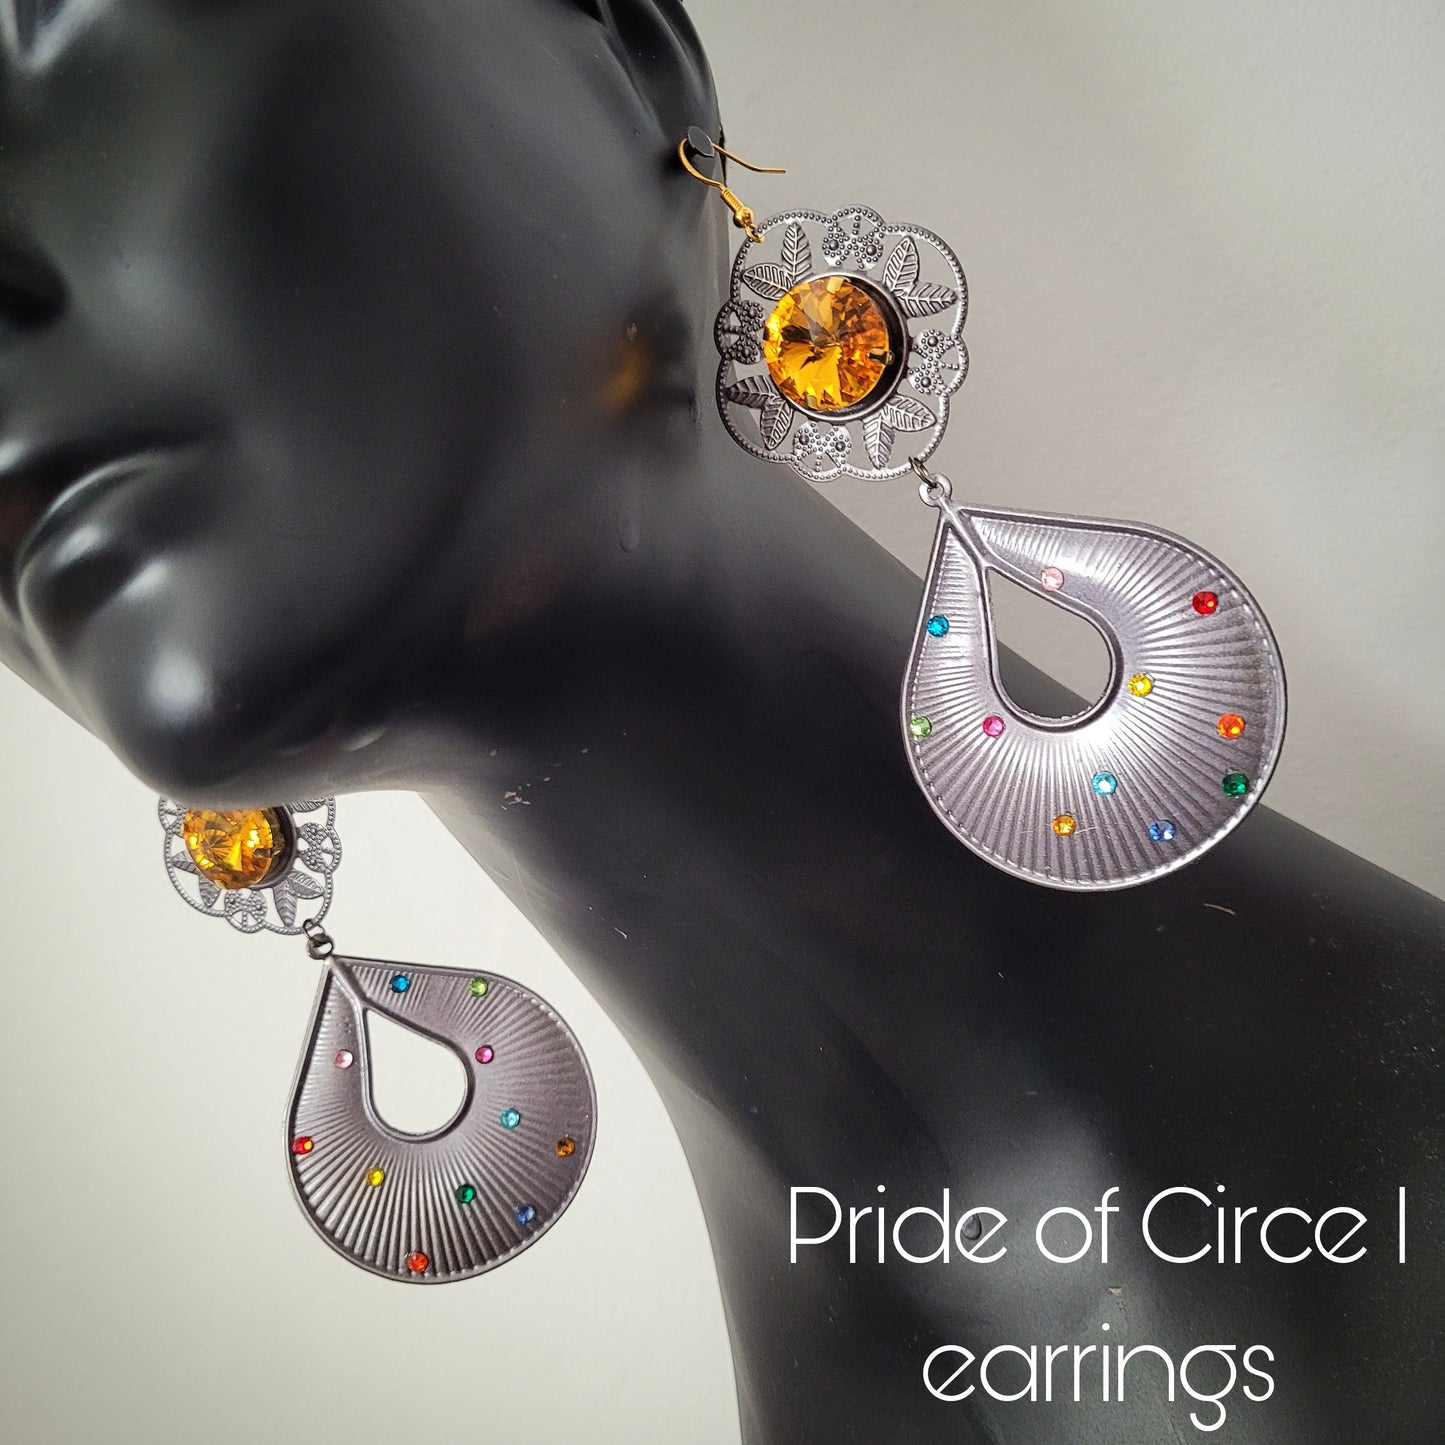 Deusa ex Machina collection: The Pride of Circe earrings